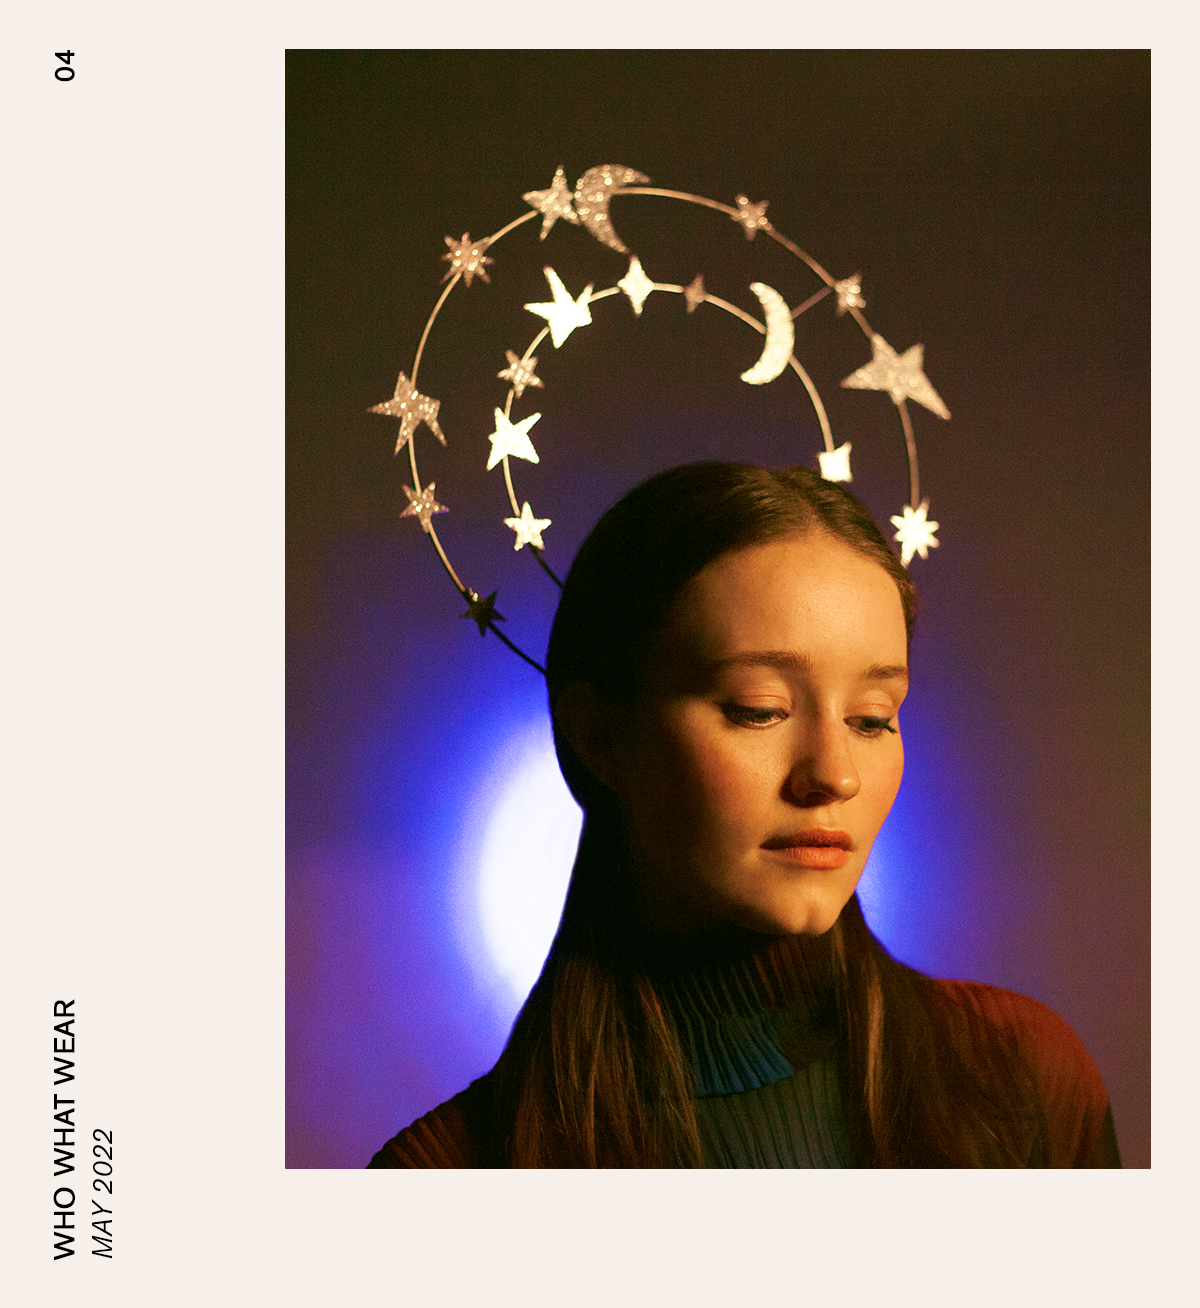 Get Your Summer Playlists Ready-Sigrid Is Back With an Empowering New Album